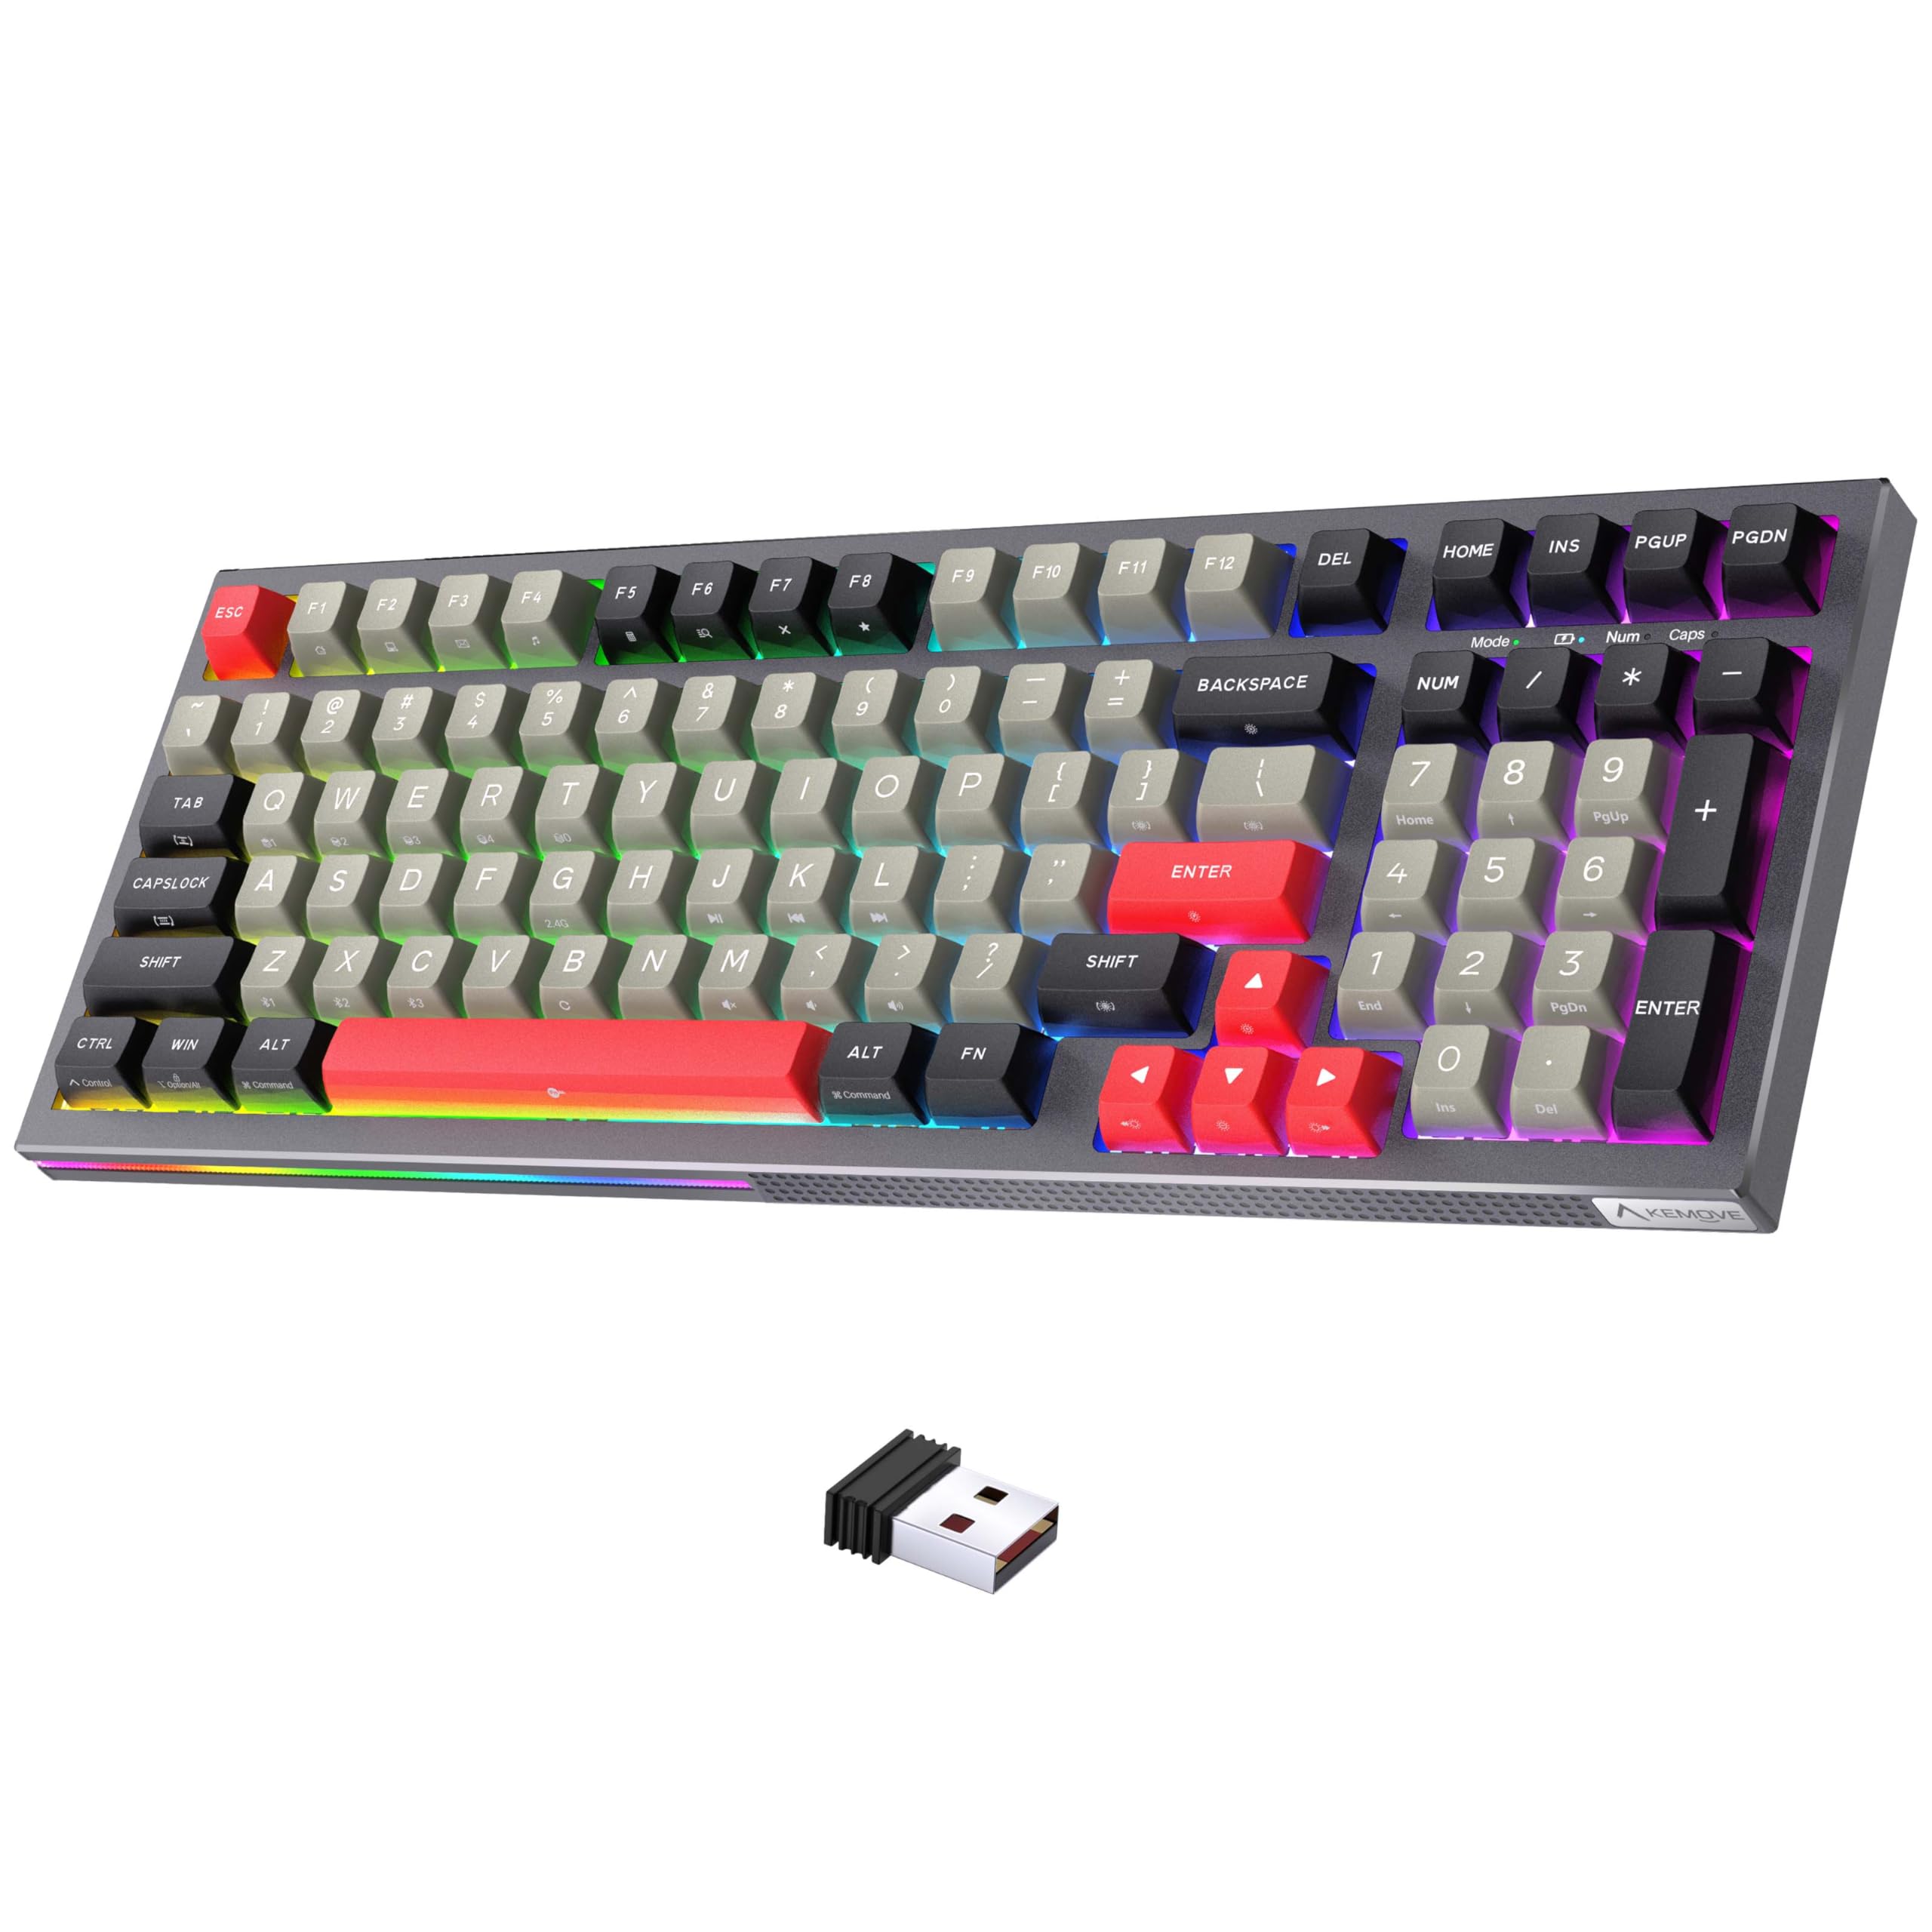 KEMOVE K98 Wireless Mechanical Keyboard with Number Pad RGB Hot